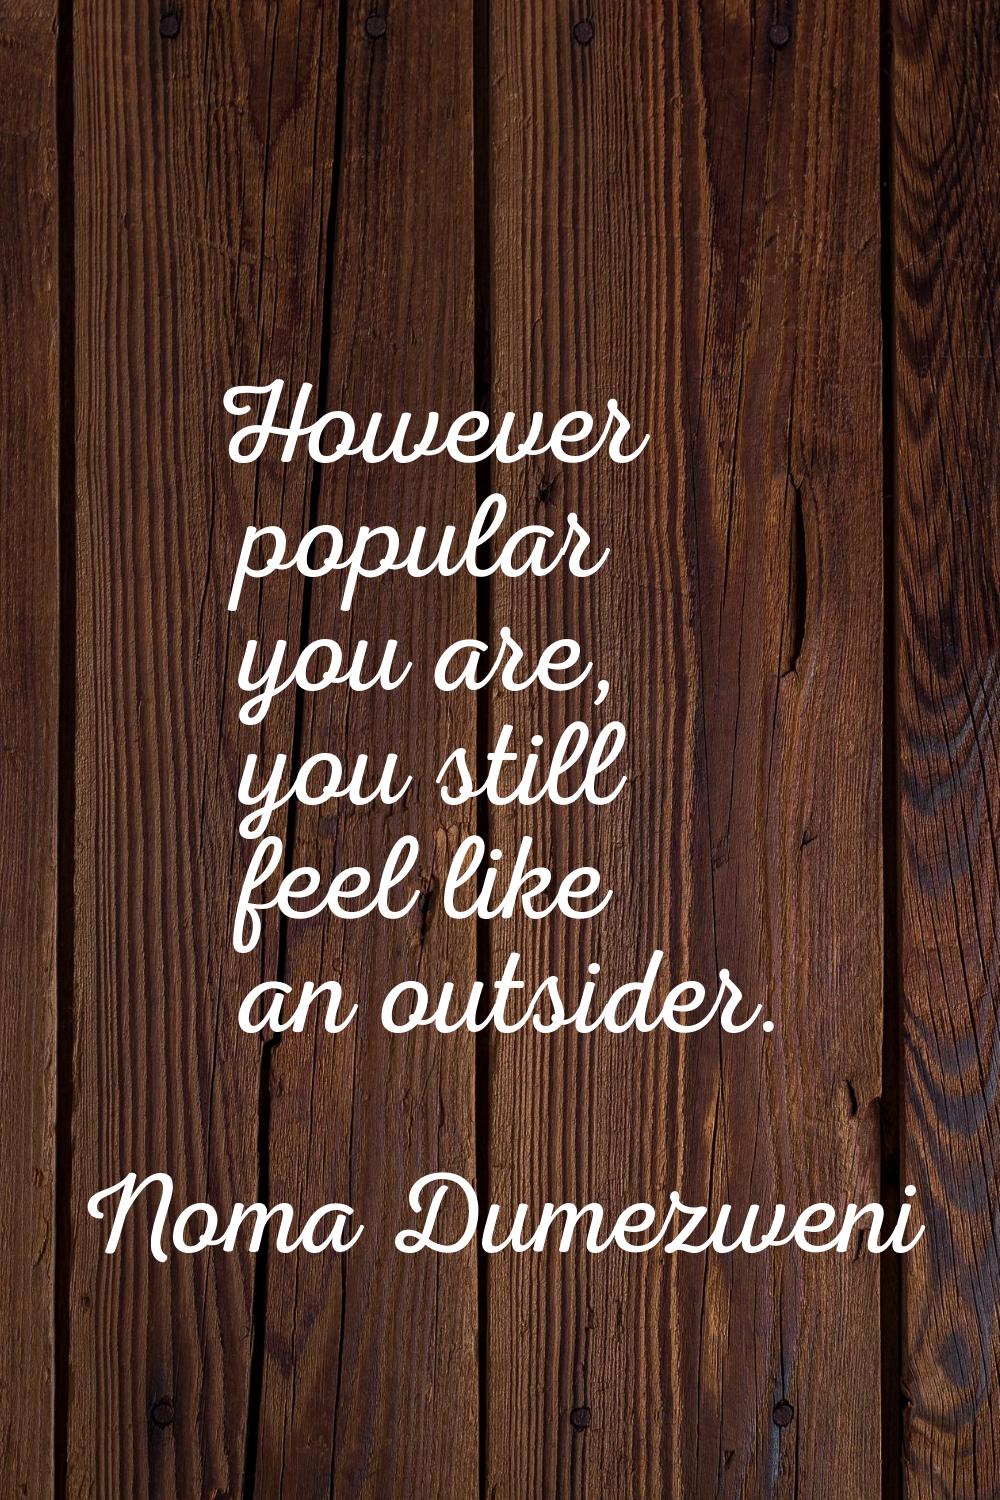 However popular you are, you still feel like an outsider.